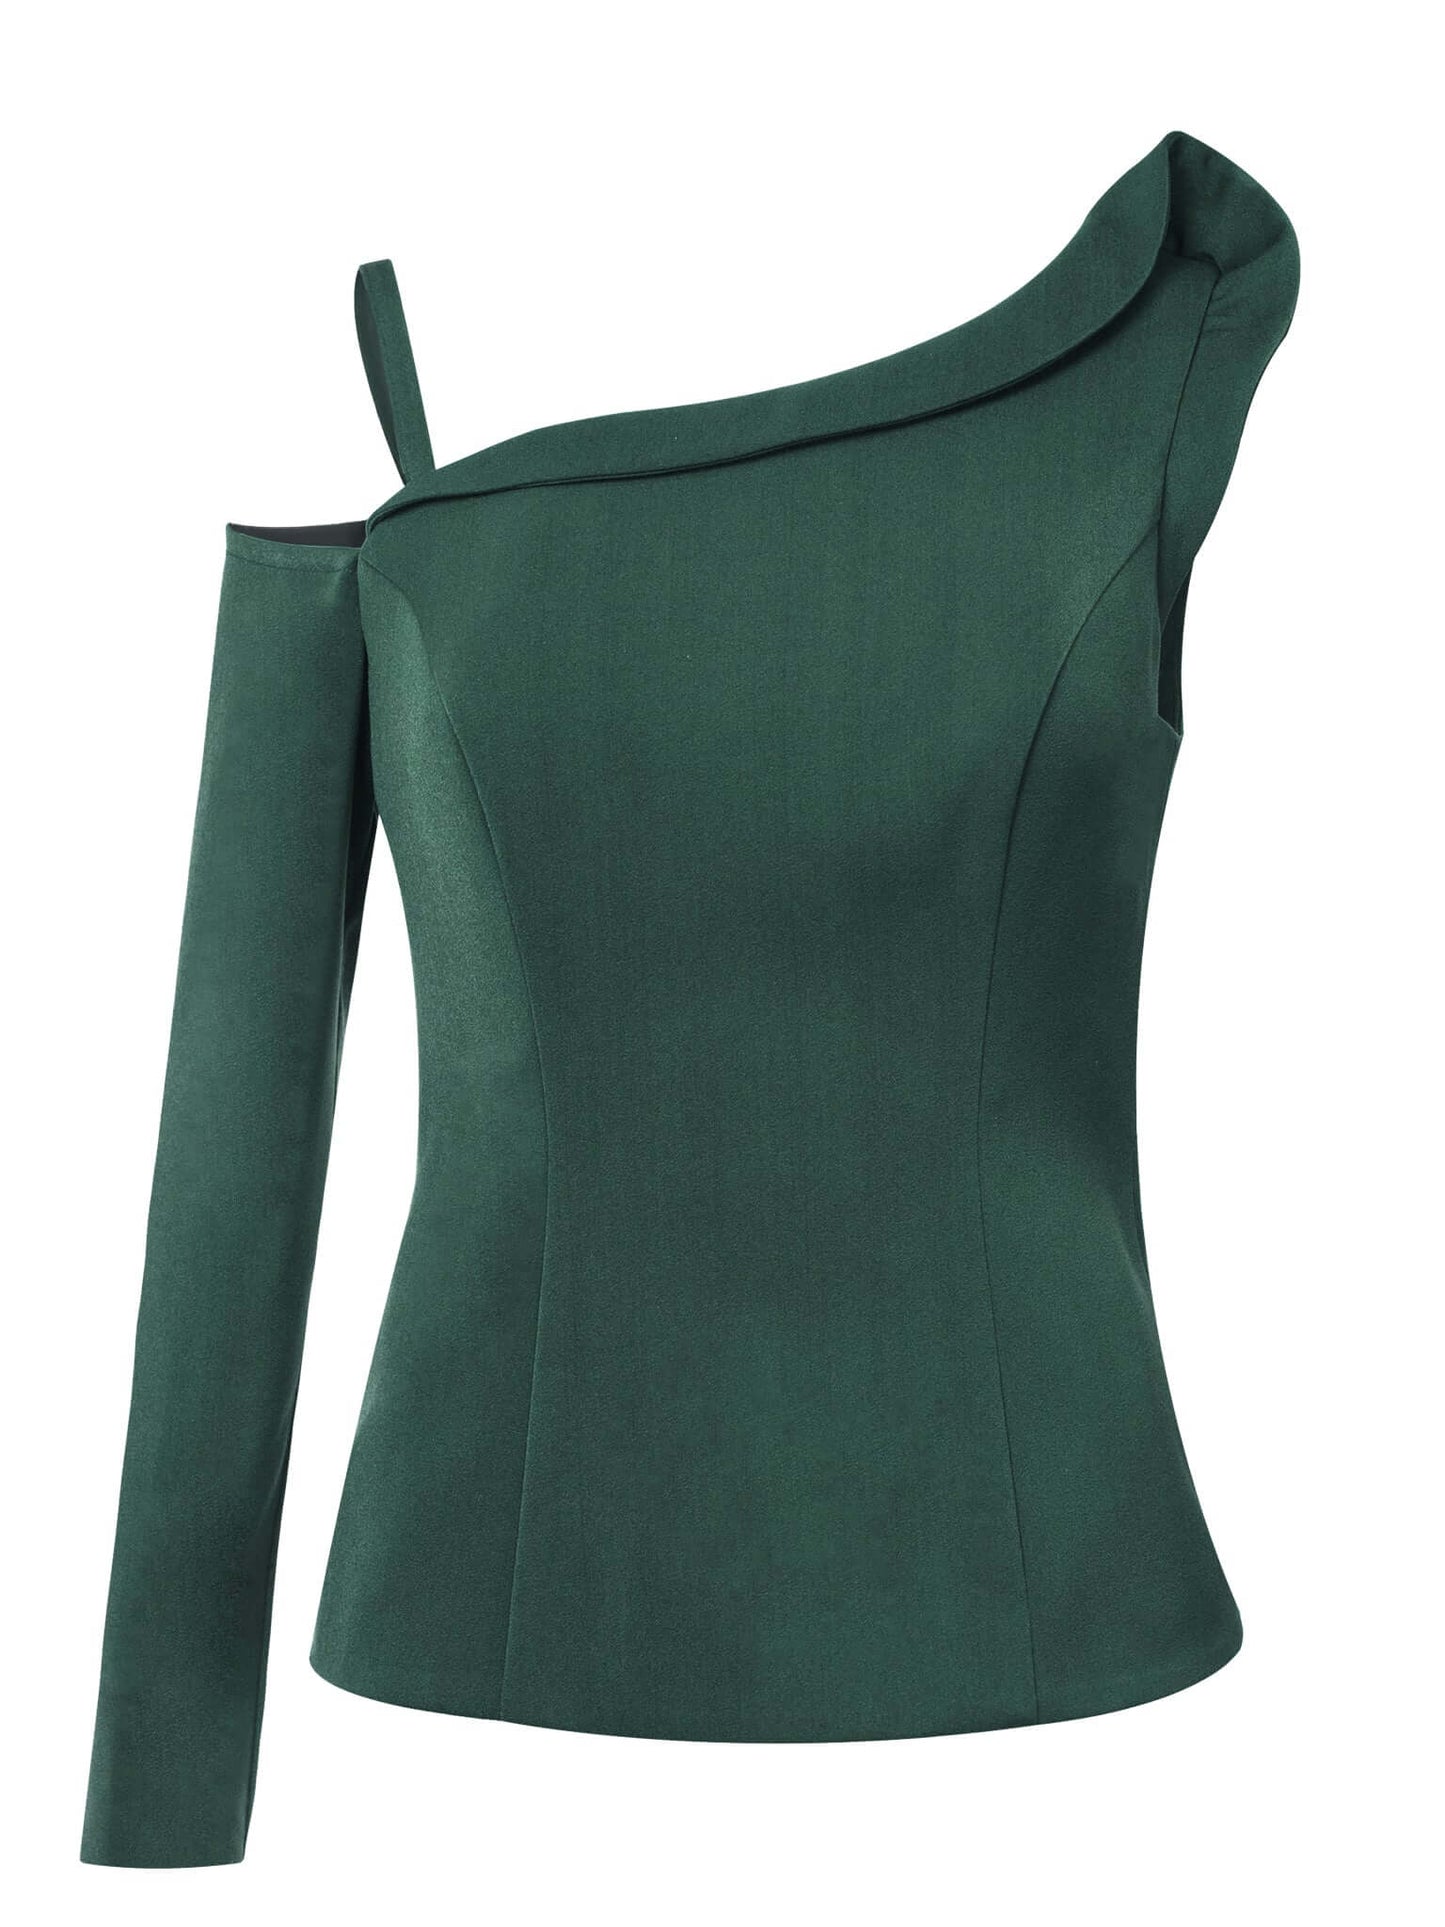 Tia Dorraine Emerald Dream Asymmetric One-Shoulder Top This incredible emerald green off-shoulder top has a single long sleeve with a tiny elegant strap, while the other shoulder includes an exciting drape going all the way across the front. Its waste-fit